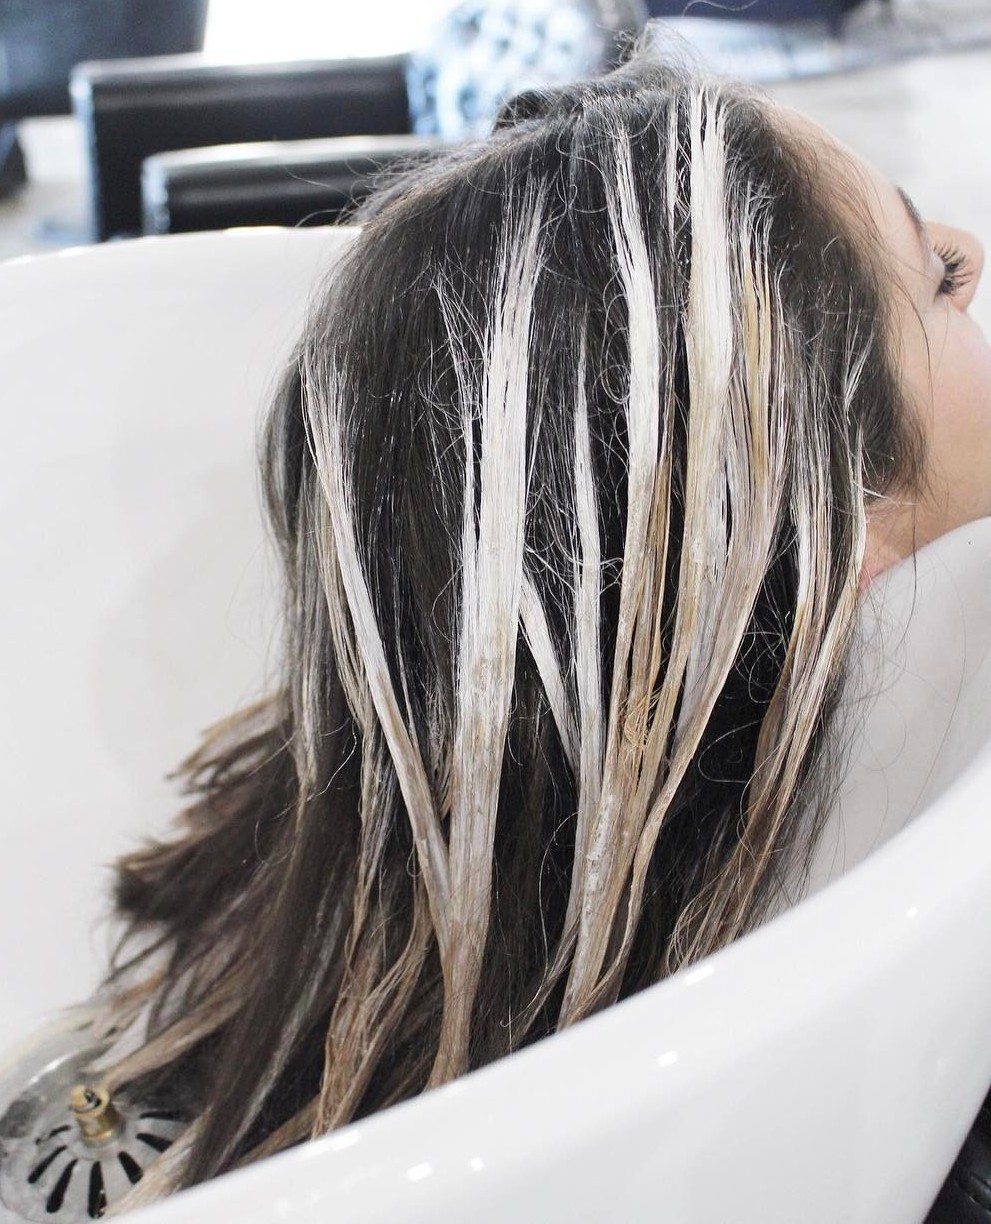 Is Dyeing Your Hair Bad and Can You Avoid the Negative Effects?